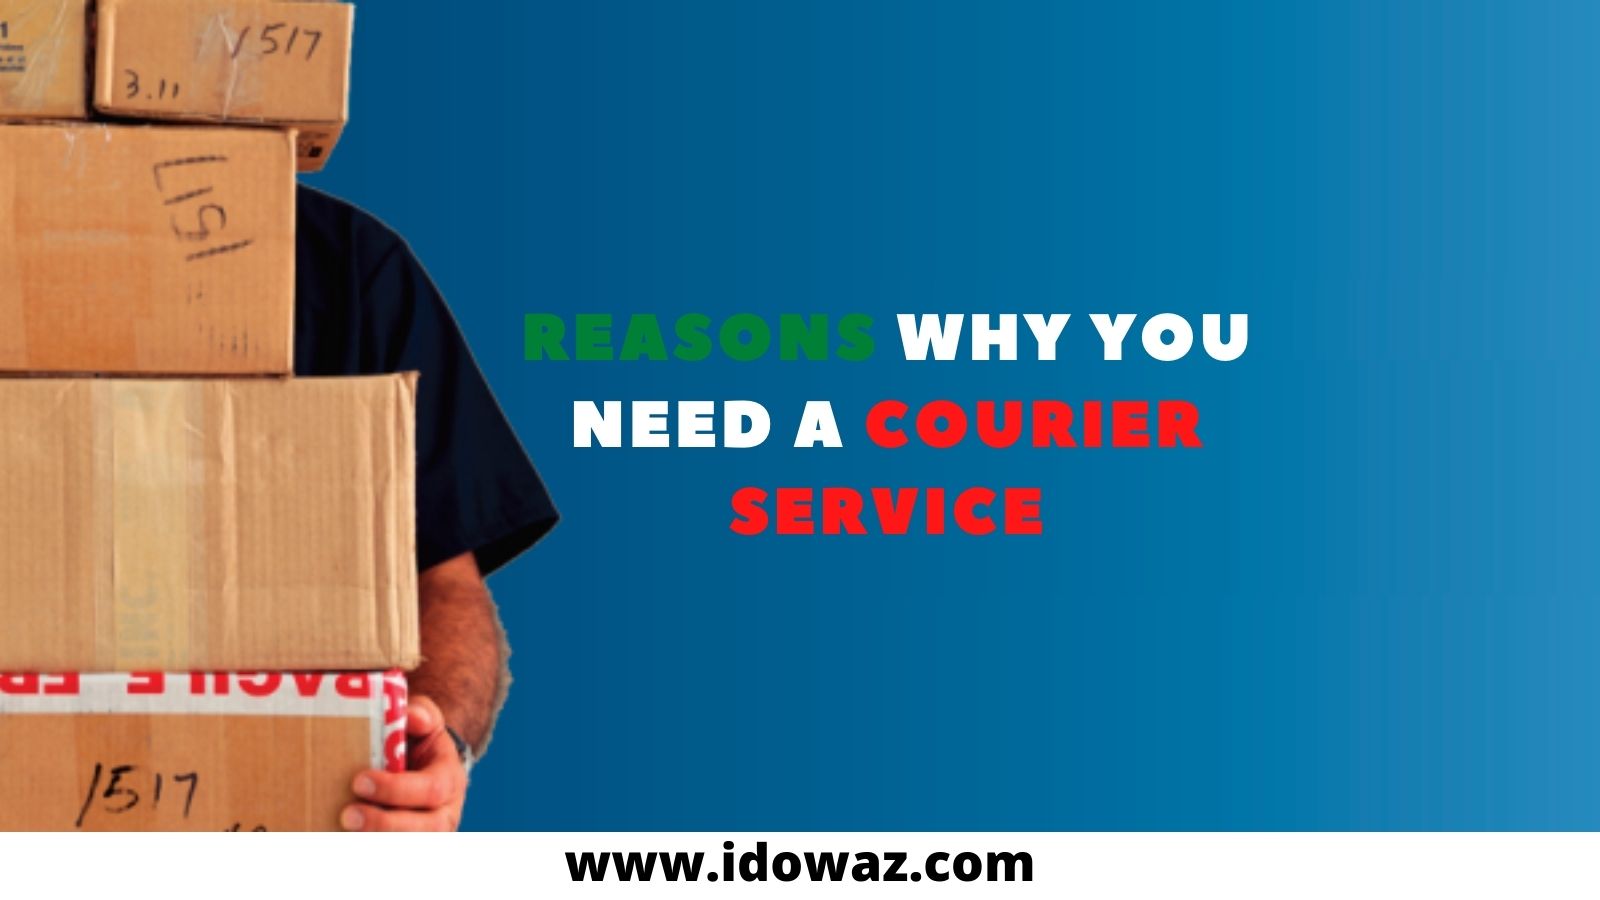 You are currently viewing REASONS WHY YOU NEED A COURIER SERVICE